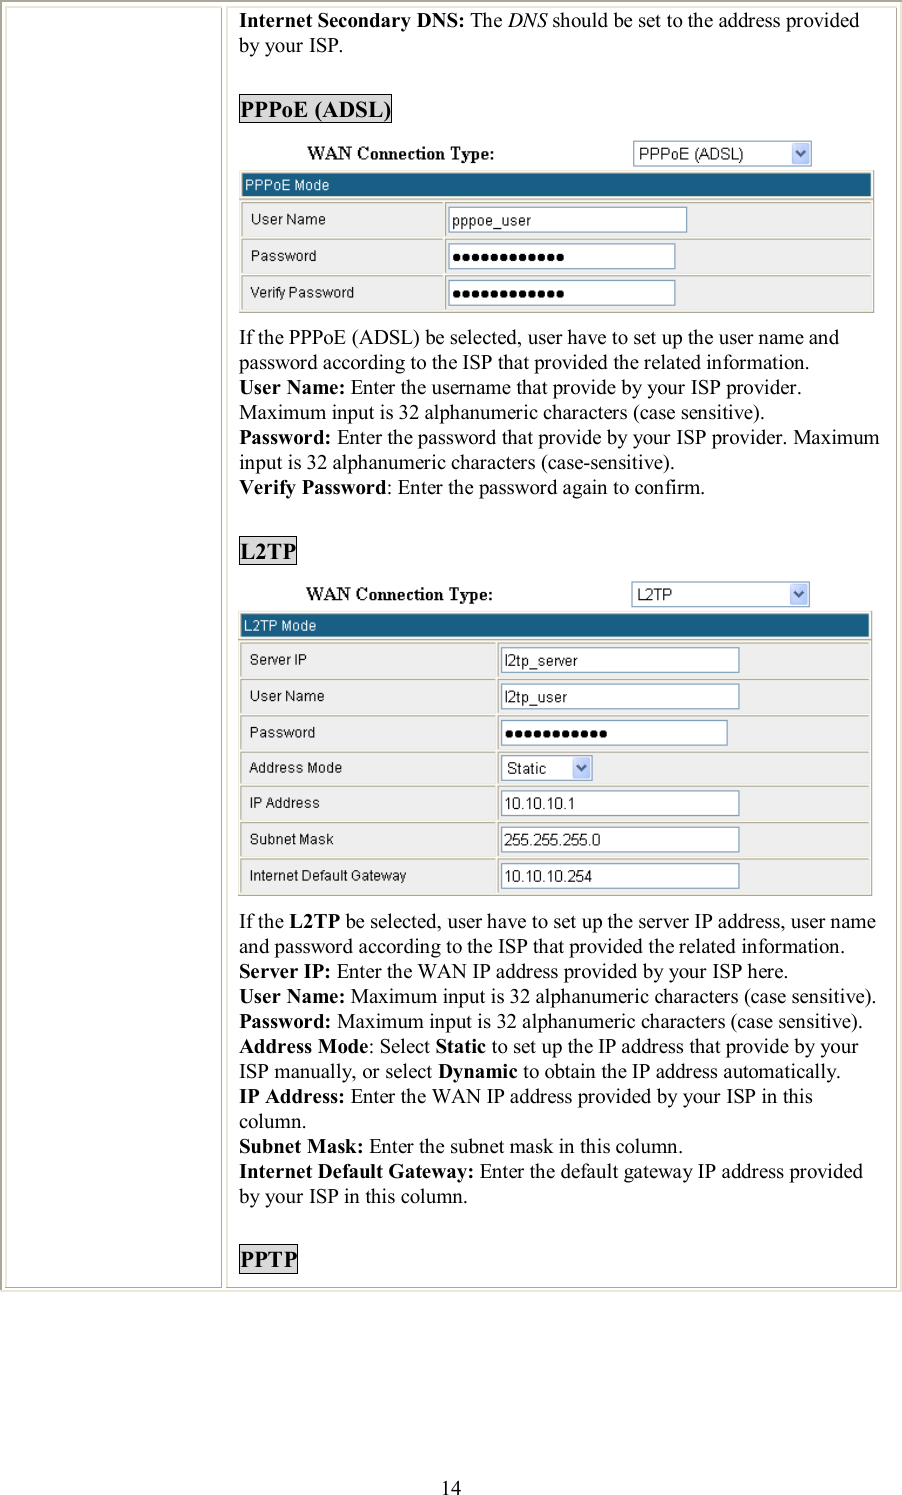    14 Internet Secondary DNS: The DNS should be set to the address provided by your ISP.  PPPoE (ADSL)  If the PPPoE (ADSL) be selected, user have to set up the user name and password according to the ISP that provided the related information. User Name: Enter the username that provide by your ISP provider. Maximum input is 32 alphanumeric characters (case sensitive). Password: Enter the password that provide by your ISP provider. Maximum input is 32 alphanumeric characters (case-sensitive). Verify Password: Enter the password again to confirm.  L2TP  If the L2TP be selected, user have to set up the server IP address, user name and password according to the ISP that provided the related information. Server IP: Enter the WAN IP address provided by your ISP here. User Name: Maximum input is 32 alphanumeric characters (case sensitive). Password: Maximum input is 32 alphanumeric characters (case sensitive). Address Mode: Select Static to set up the IP address that provide by your ISP manually, or select Dynamic to obtain the IP address automatically. IP Address: Enter the WAN IP address provided by your ISP in this column. Subnet Mask: Enter the subnet mask in this column. Internet Default Gateway: Enter the default gateway IP address provided by your ISP in this column.  PPTP 